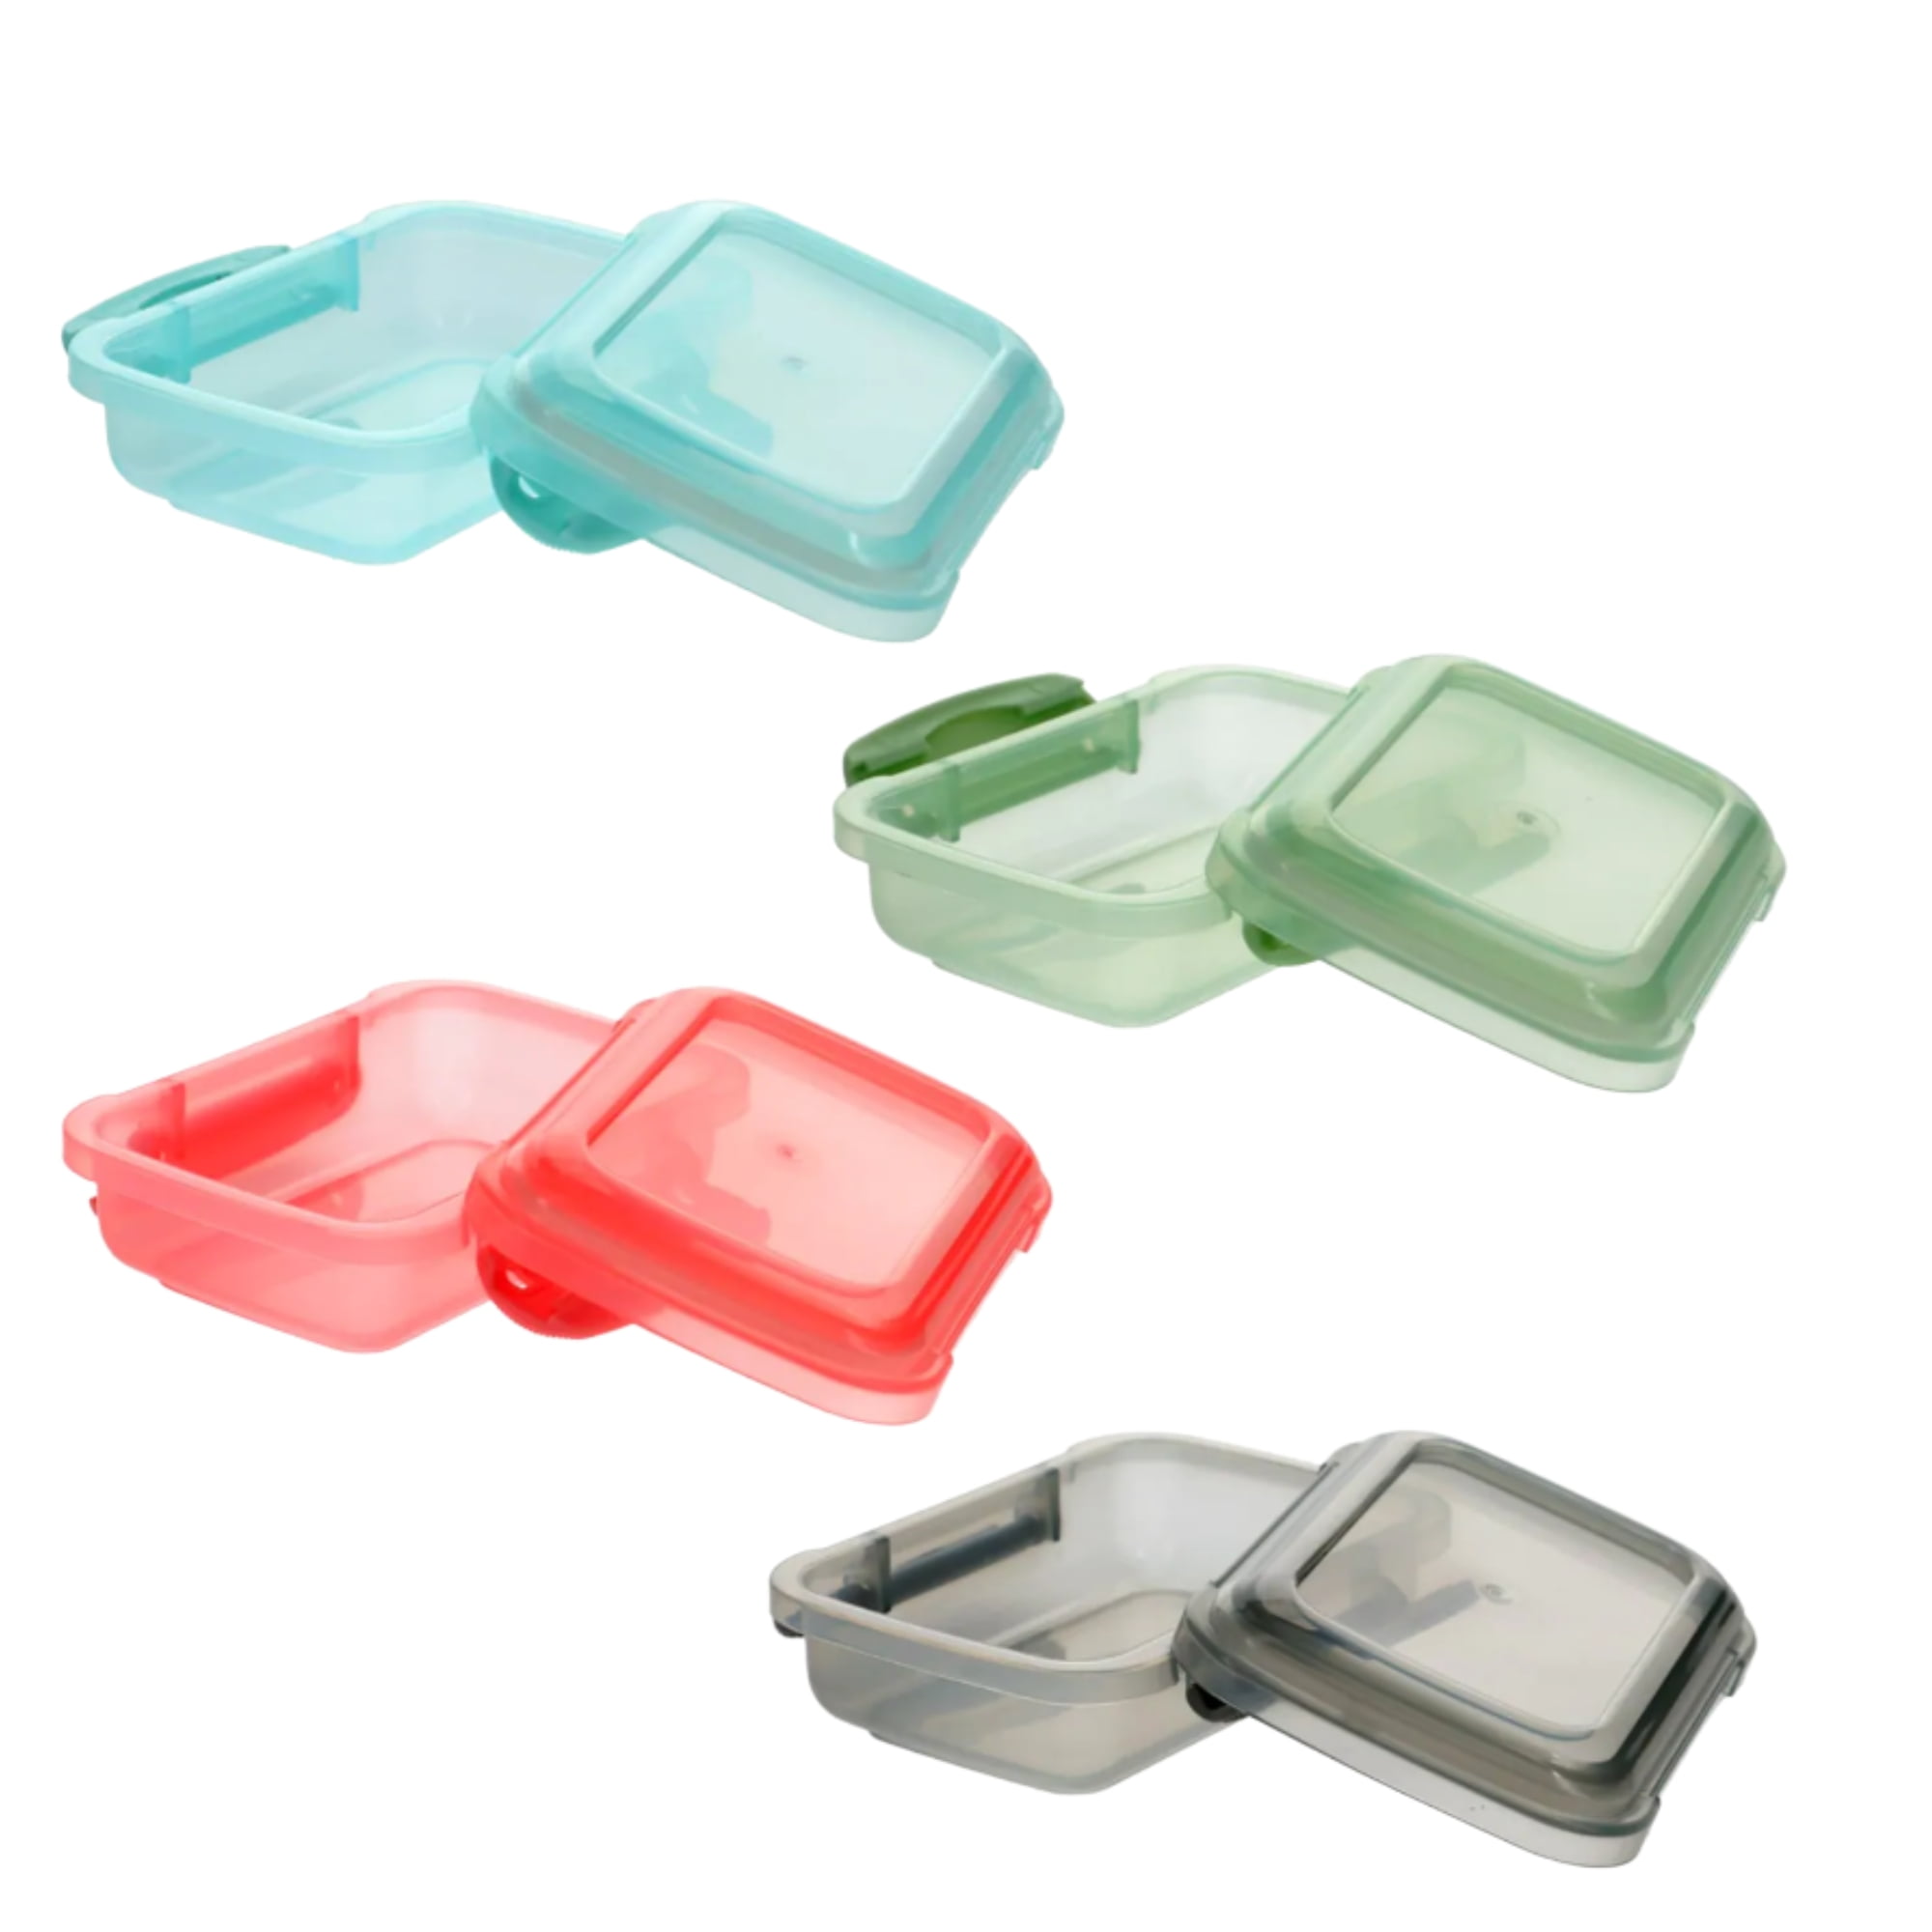 Plastic Snack Containers w/Lock Top Lids 6/Pk, Select: Mixed Colors or Pink